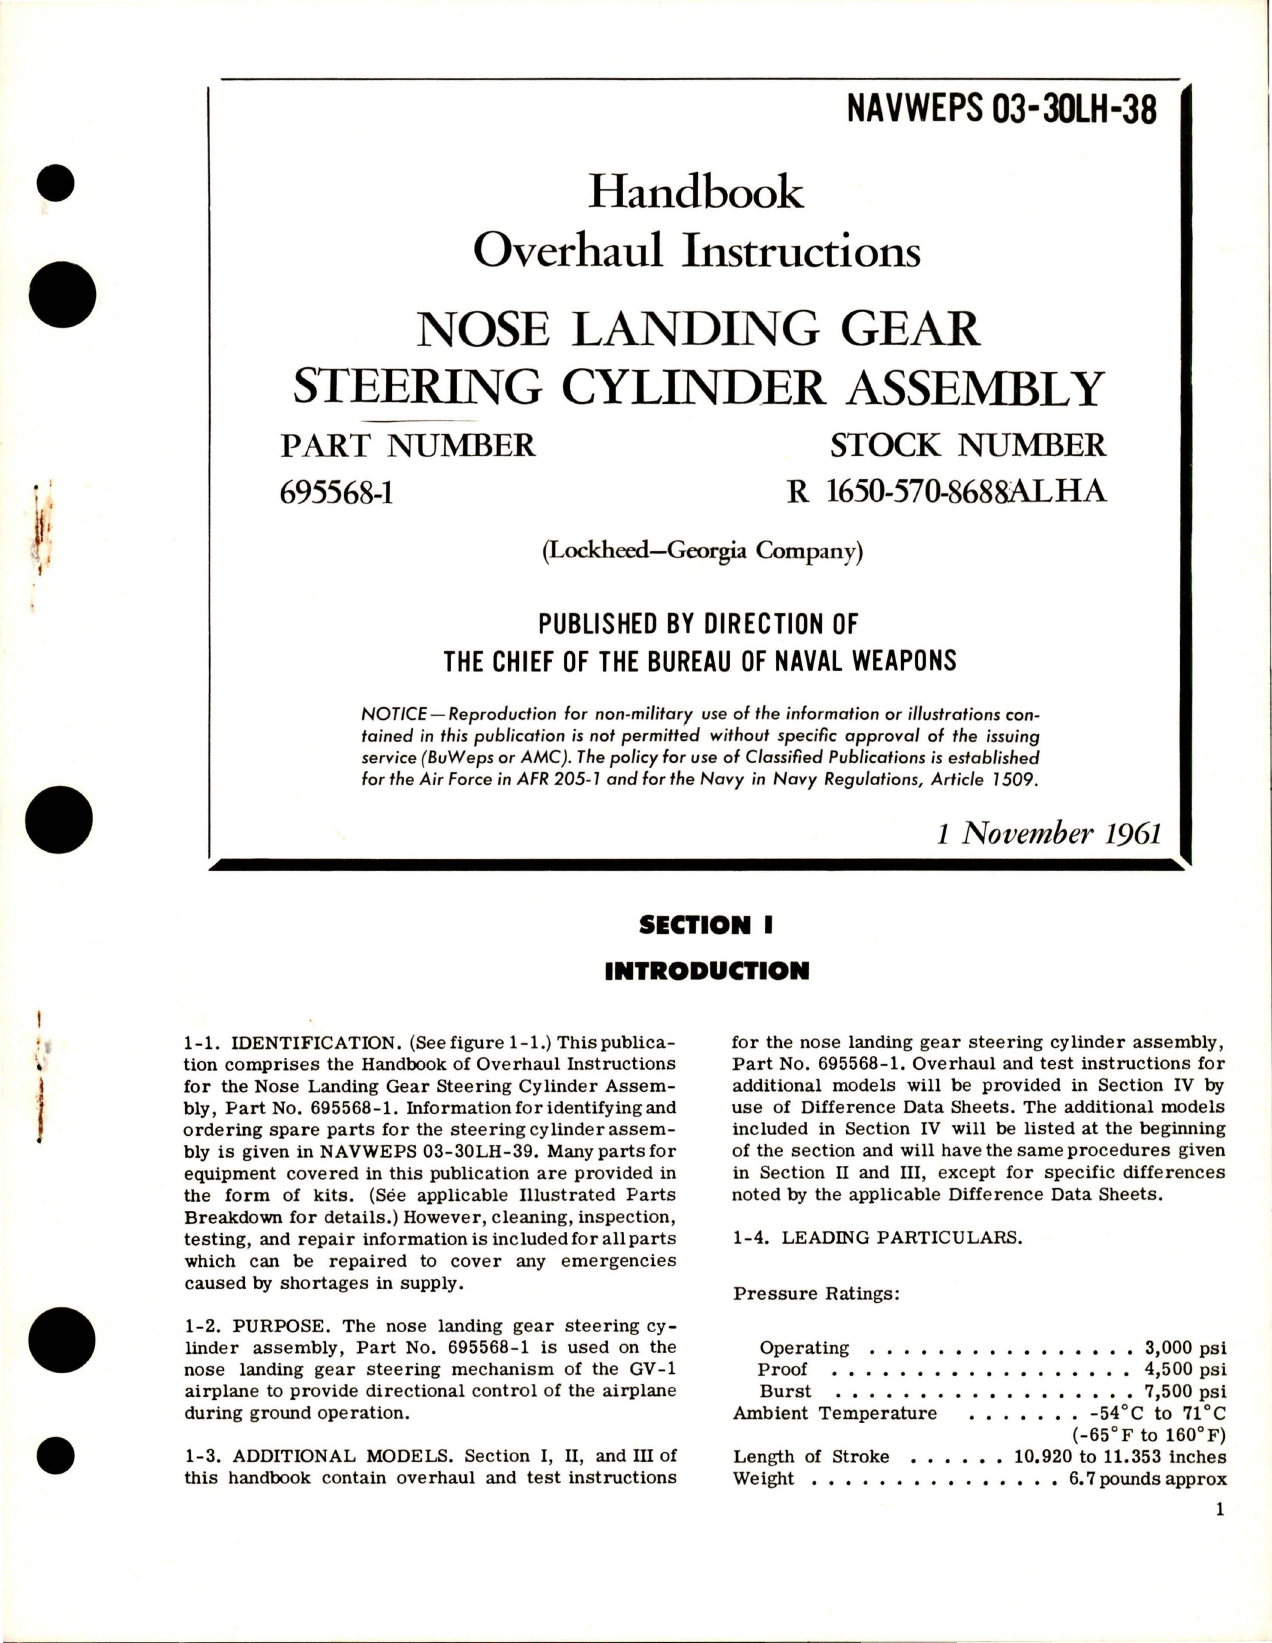 Sample page 1 from AirCorps Library document: Overhaul Instructions for Nose Landing Gear Steering Cylinder Assembly - Part 695568-1